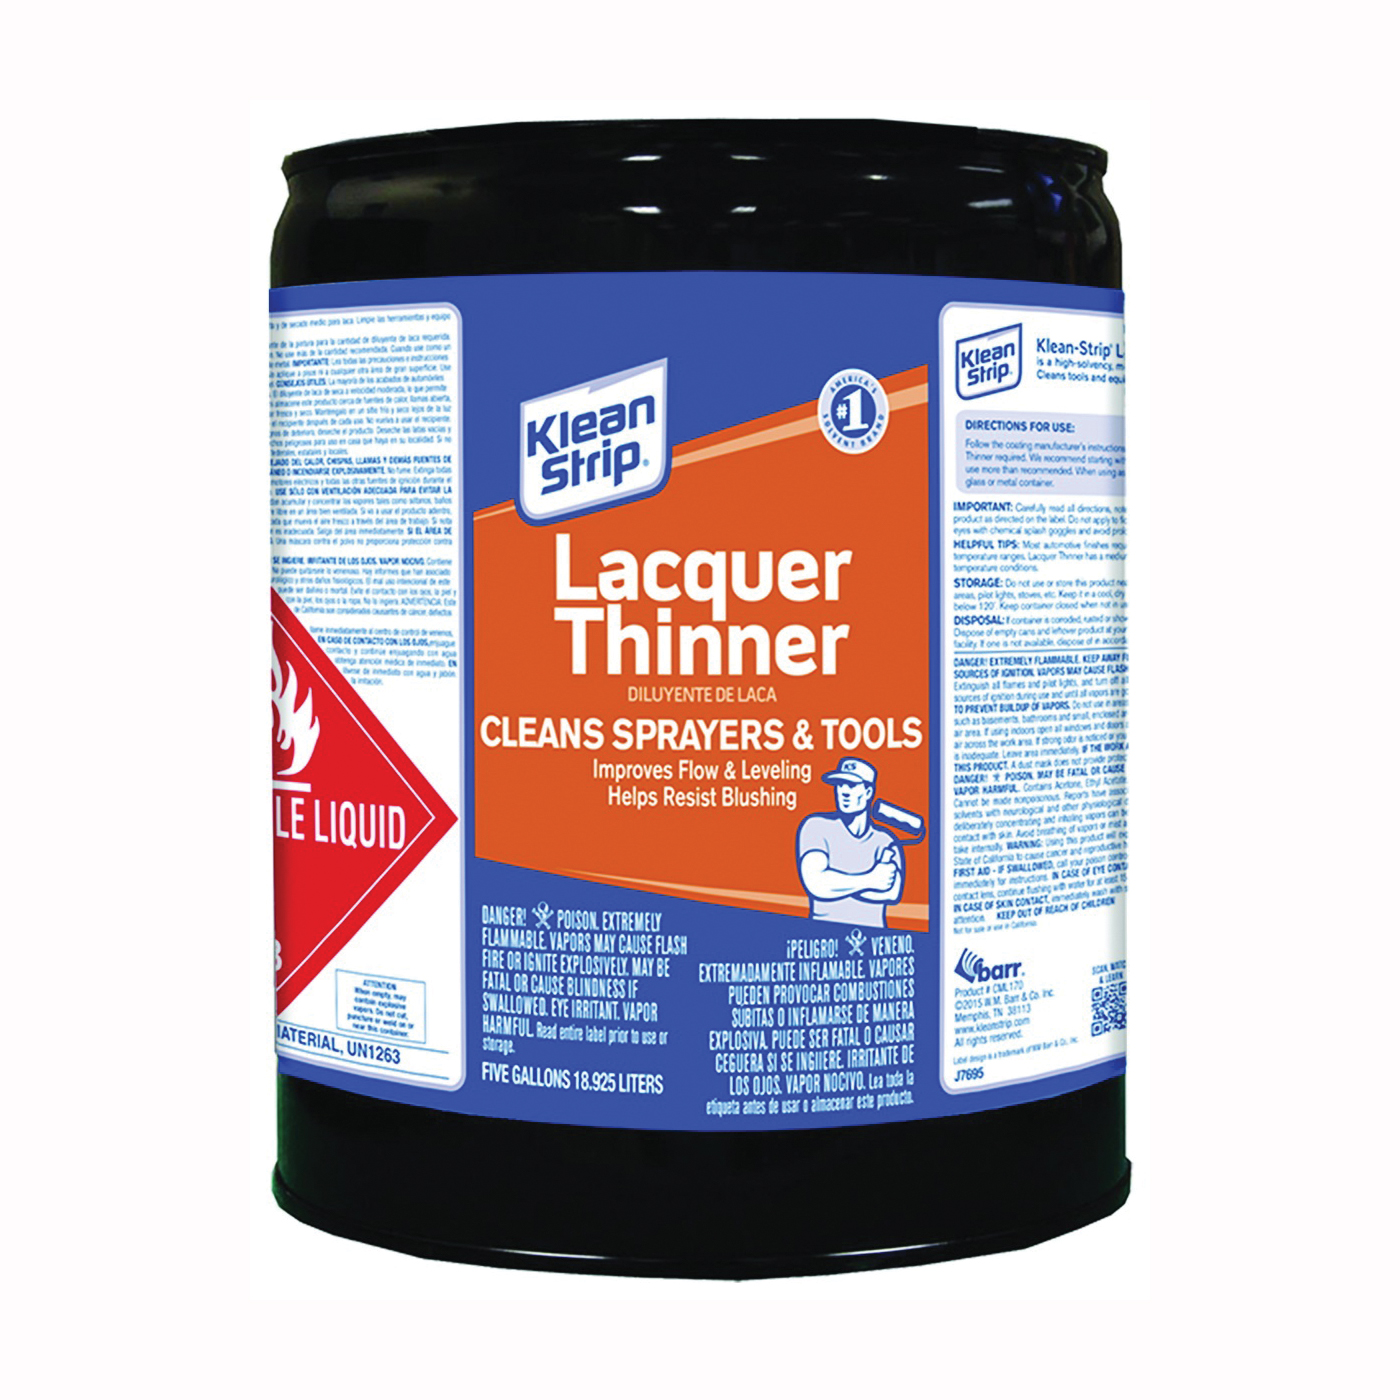 CML170 Lacquer Thinner, Liquid, Free, Clear, Water White, 5 gal, Can